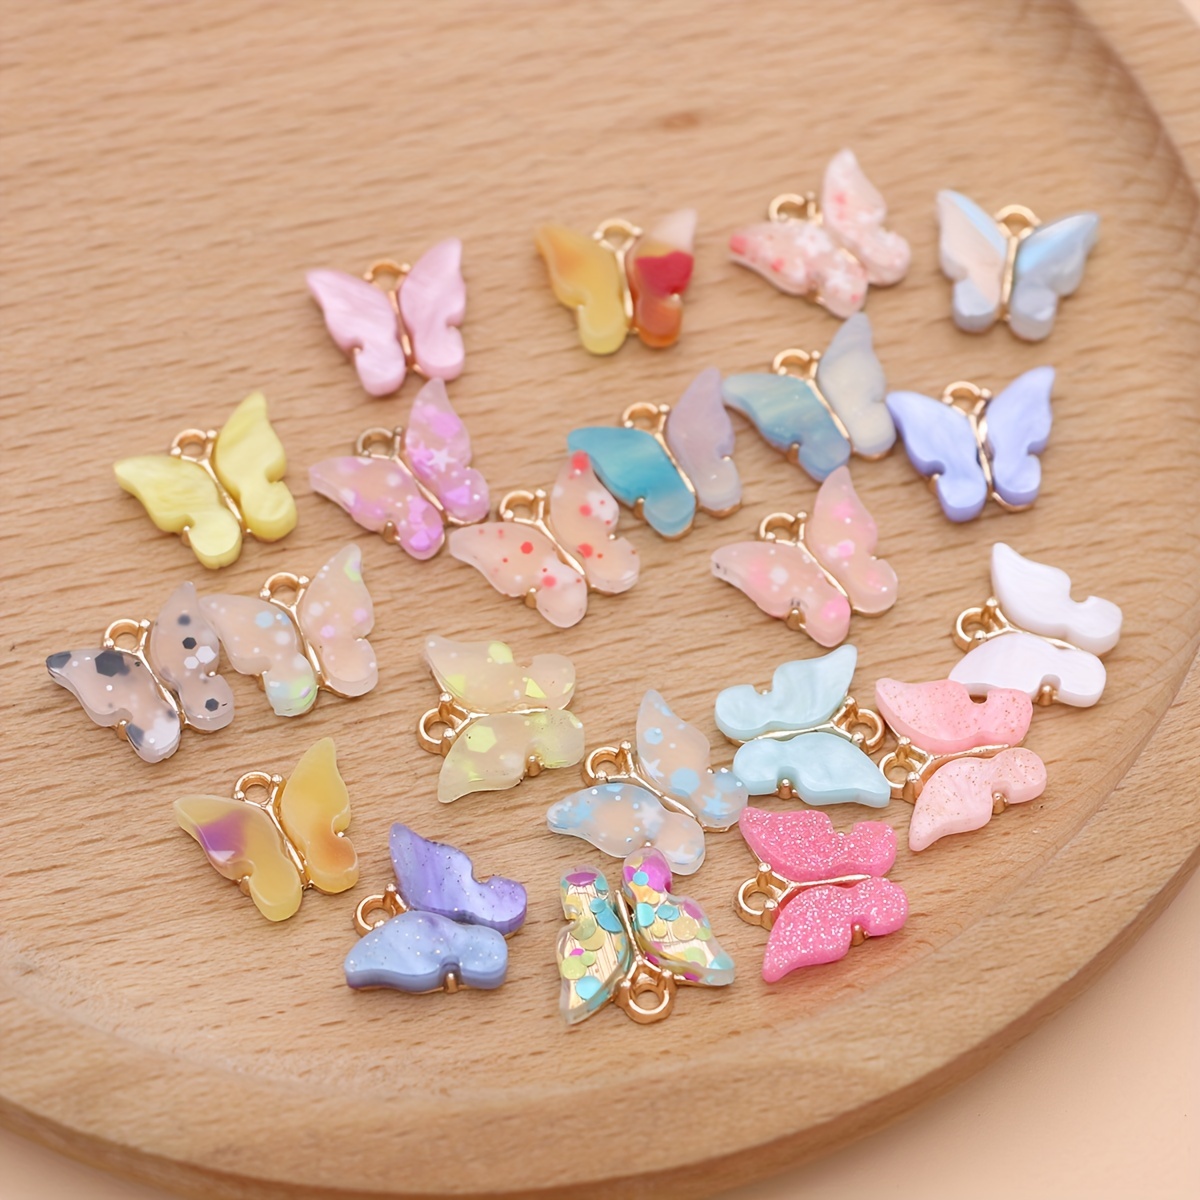 

10pcs/pack Random Color Charms Golden Acrylic Charm Butterfly Pendant Jewelry Making Earrings Bracelet Necklace Diy Accessories Craft